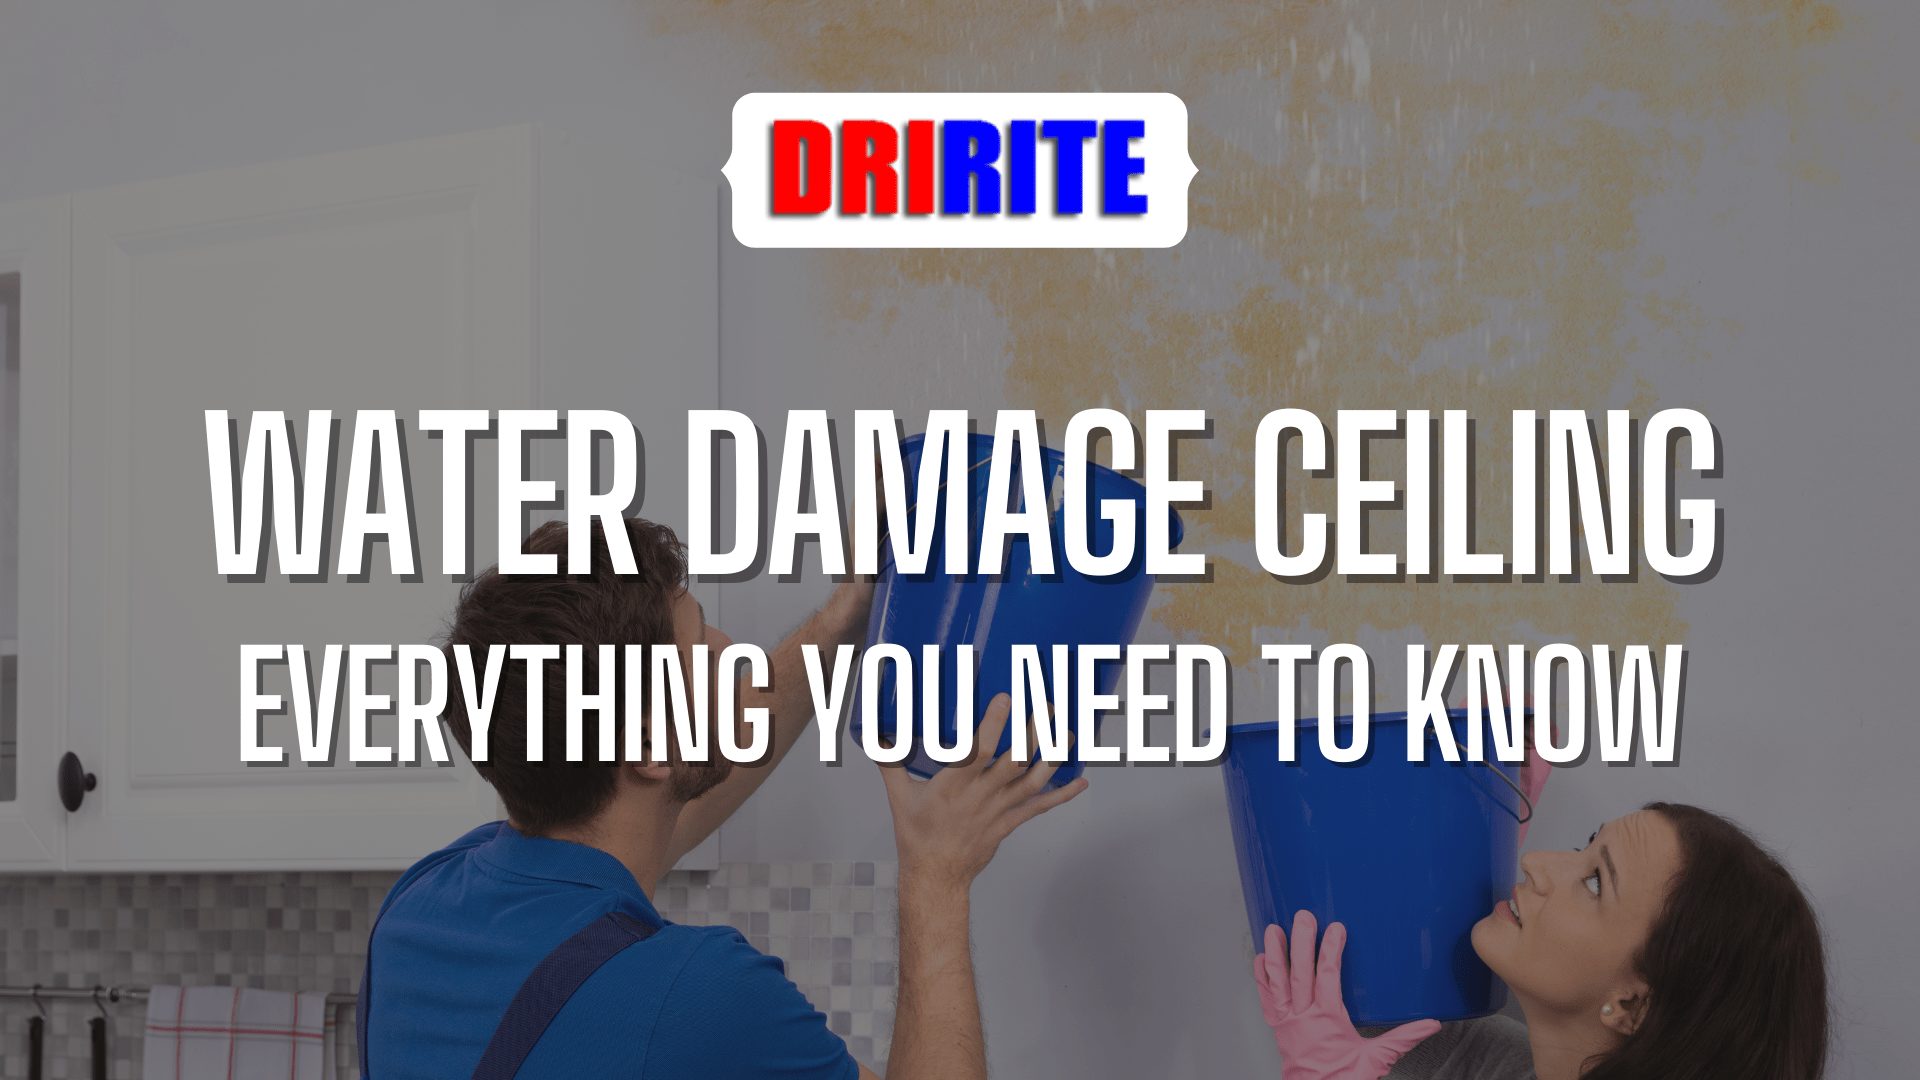 Water Damage Ceiling Everything You Need to Know